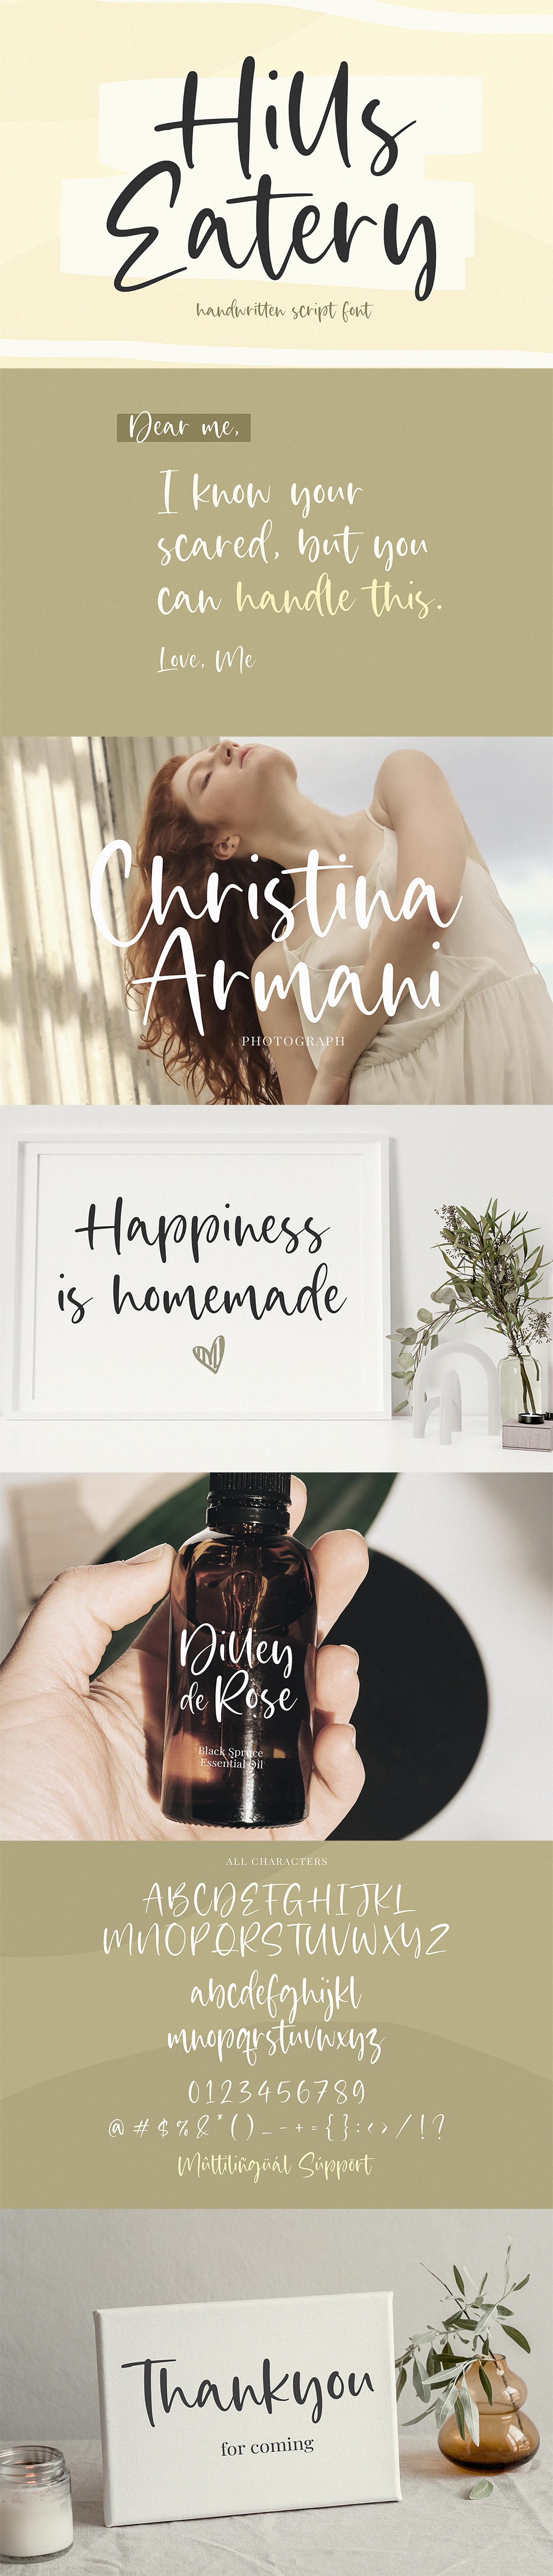 It's a lovely, timeless and flowing handwritten font, described by an elegant touch for you.